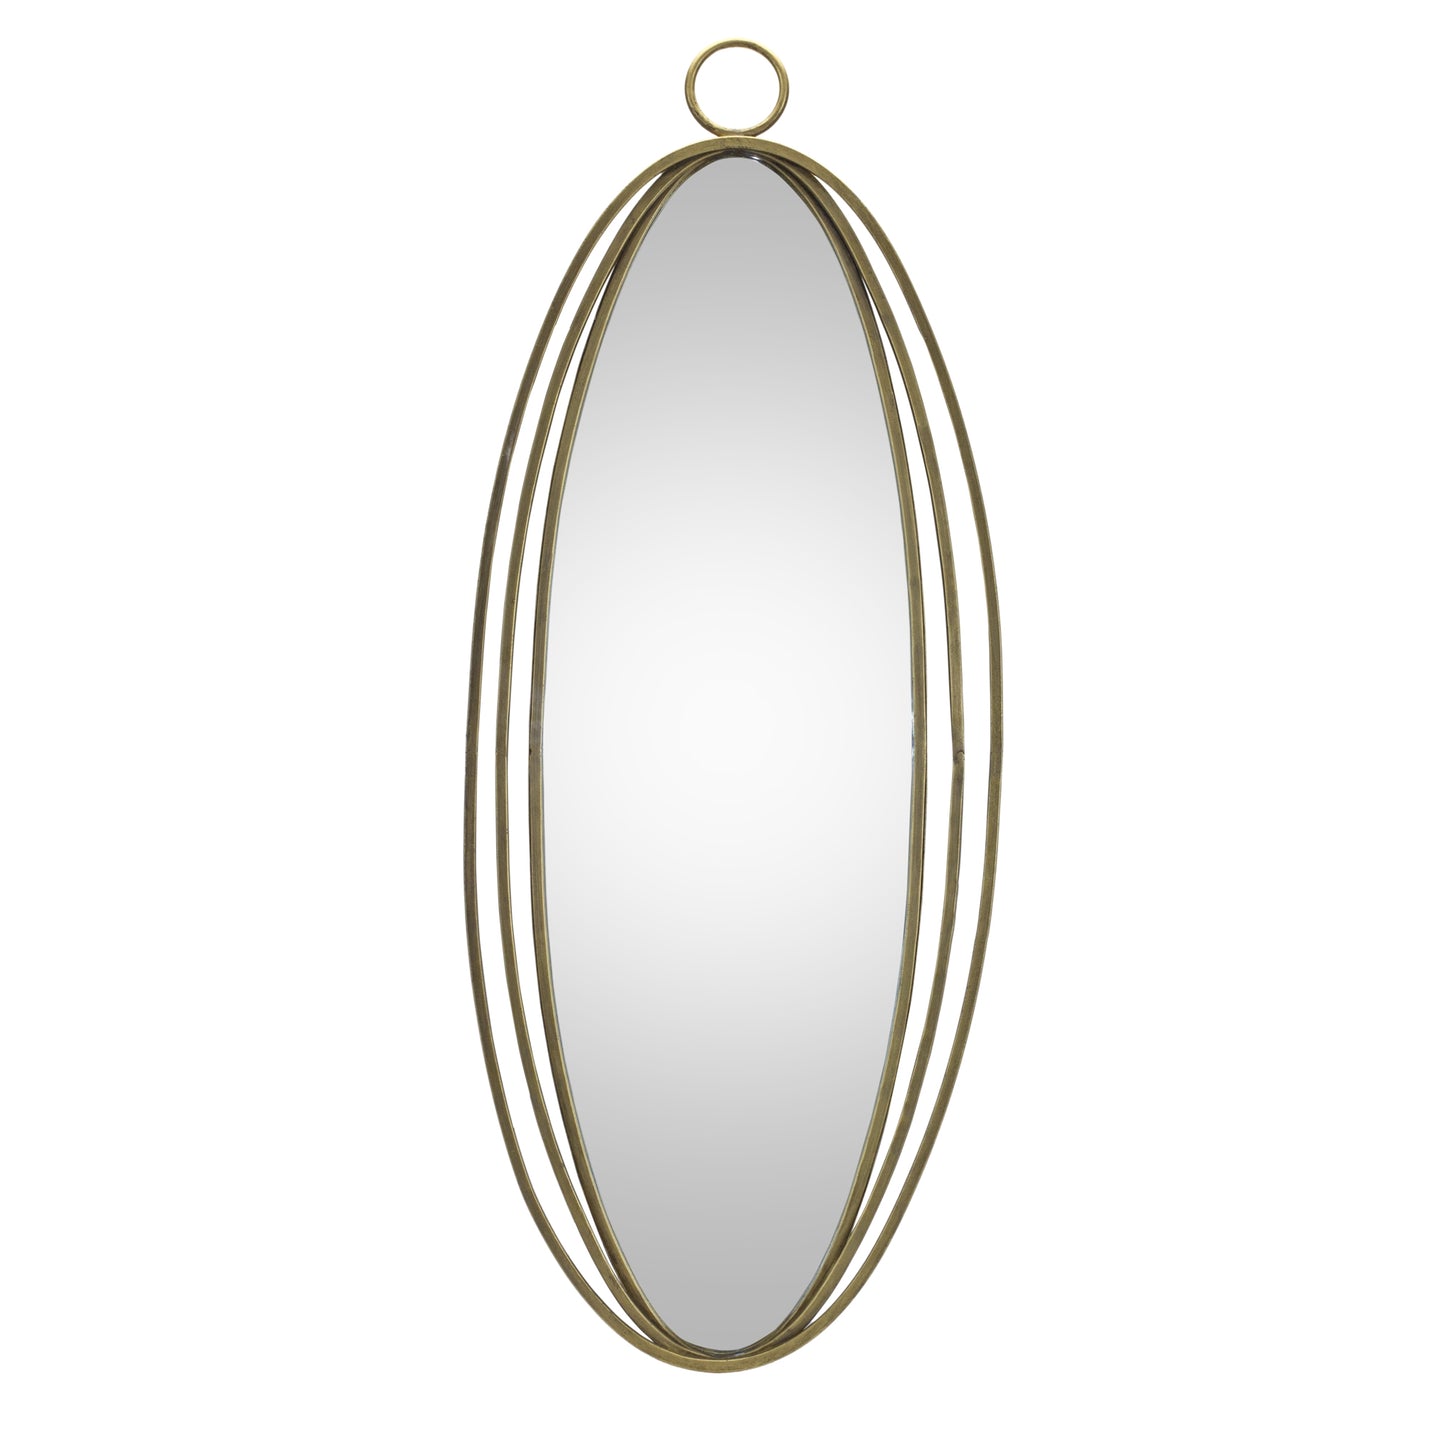 Iron Oval Wall Mirror 34.25"H